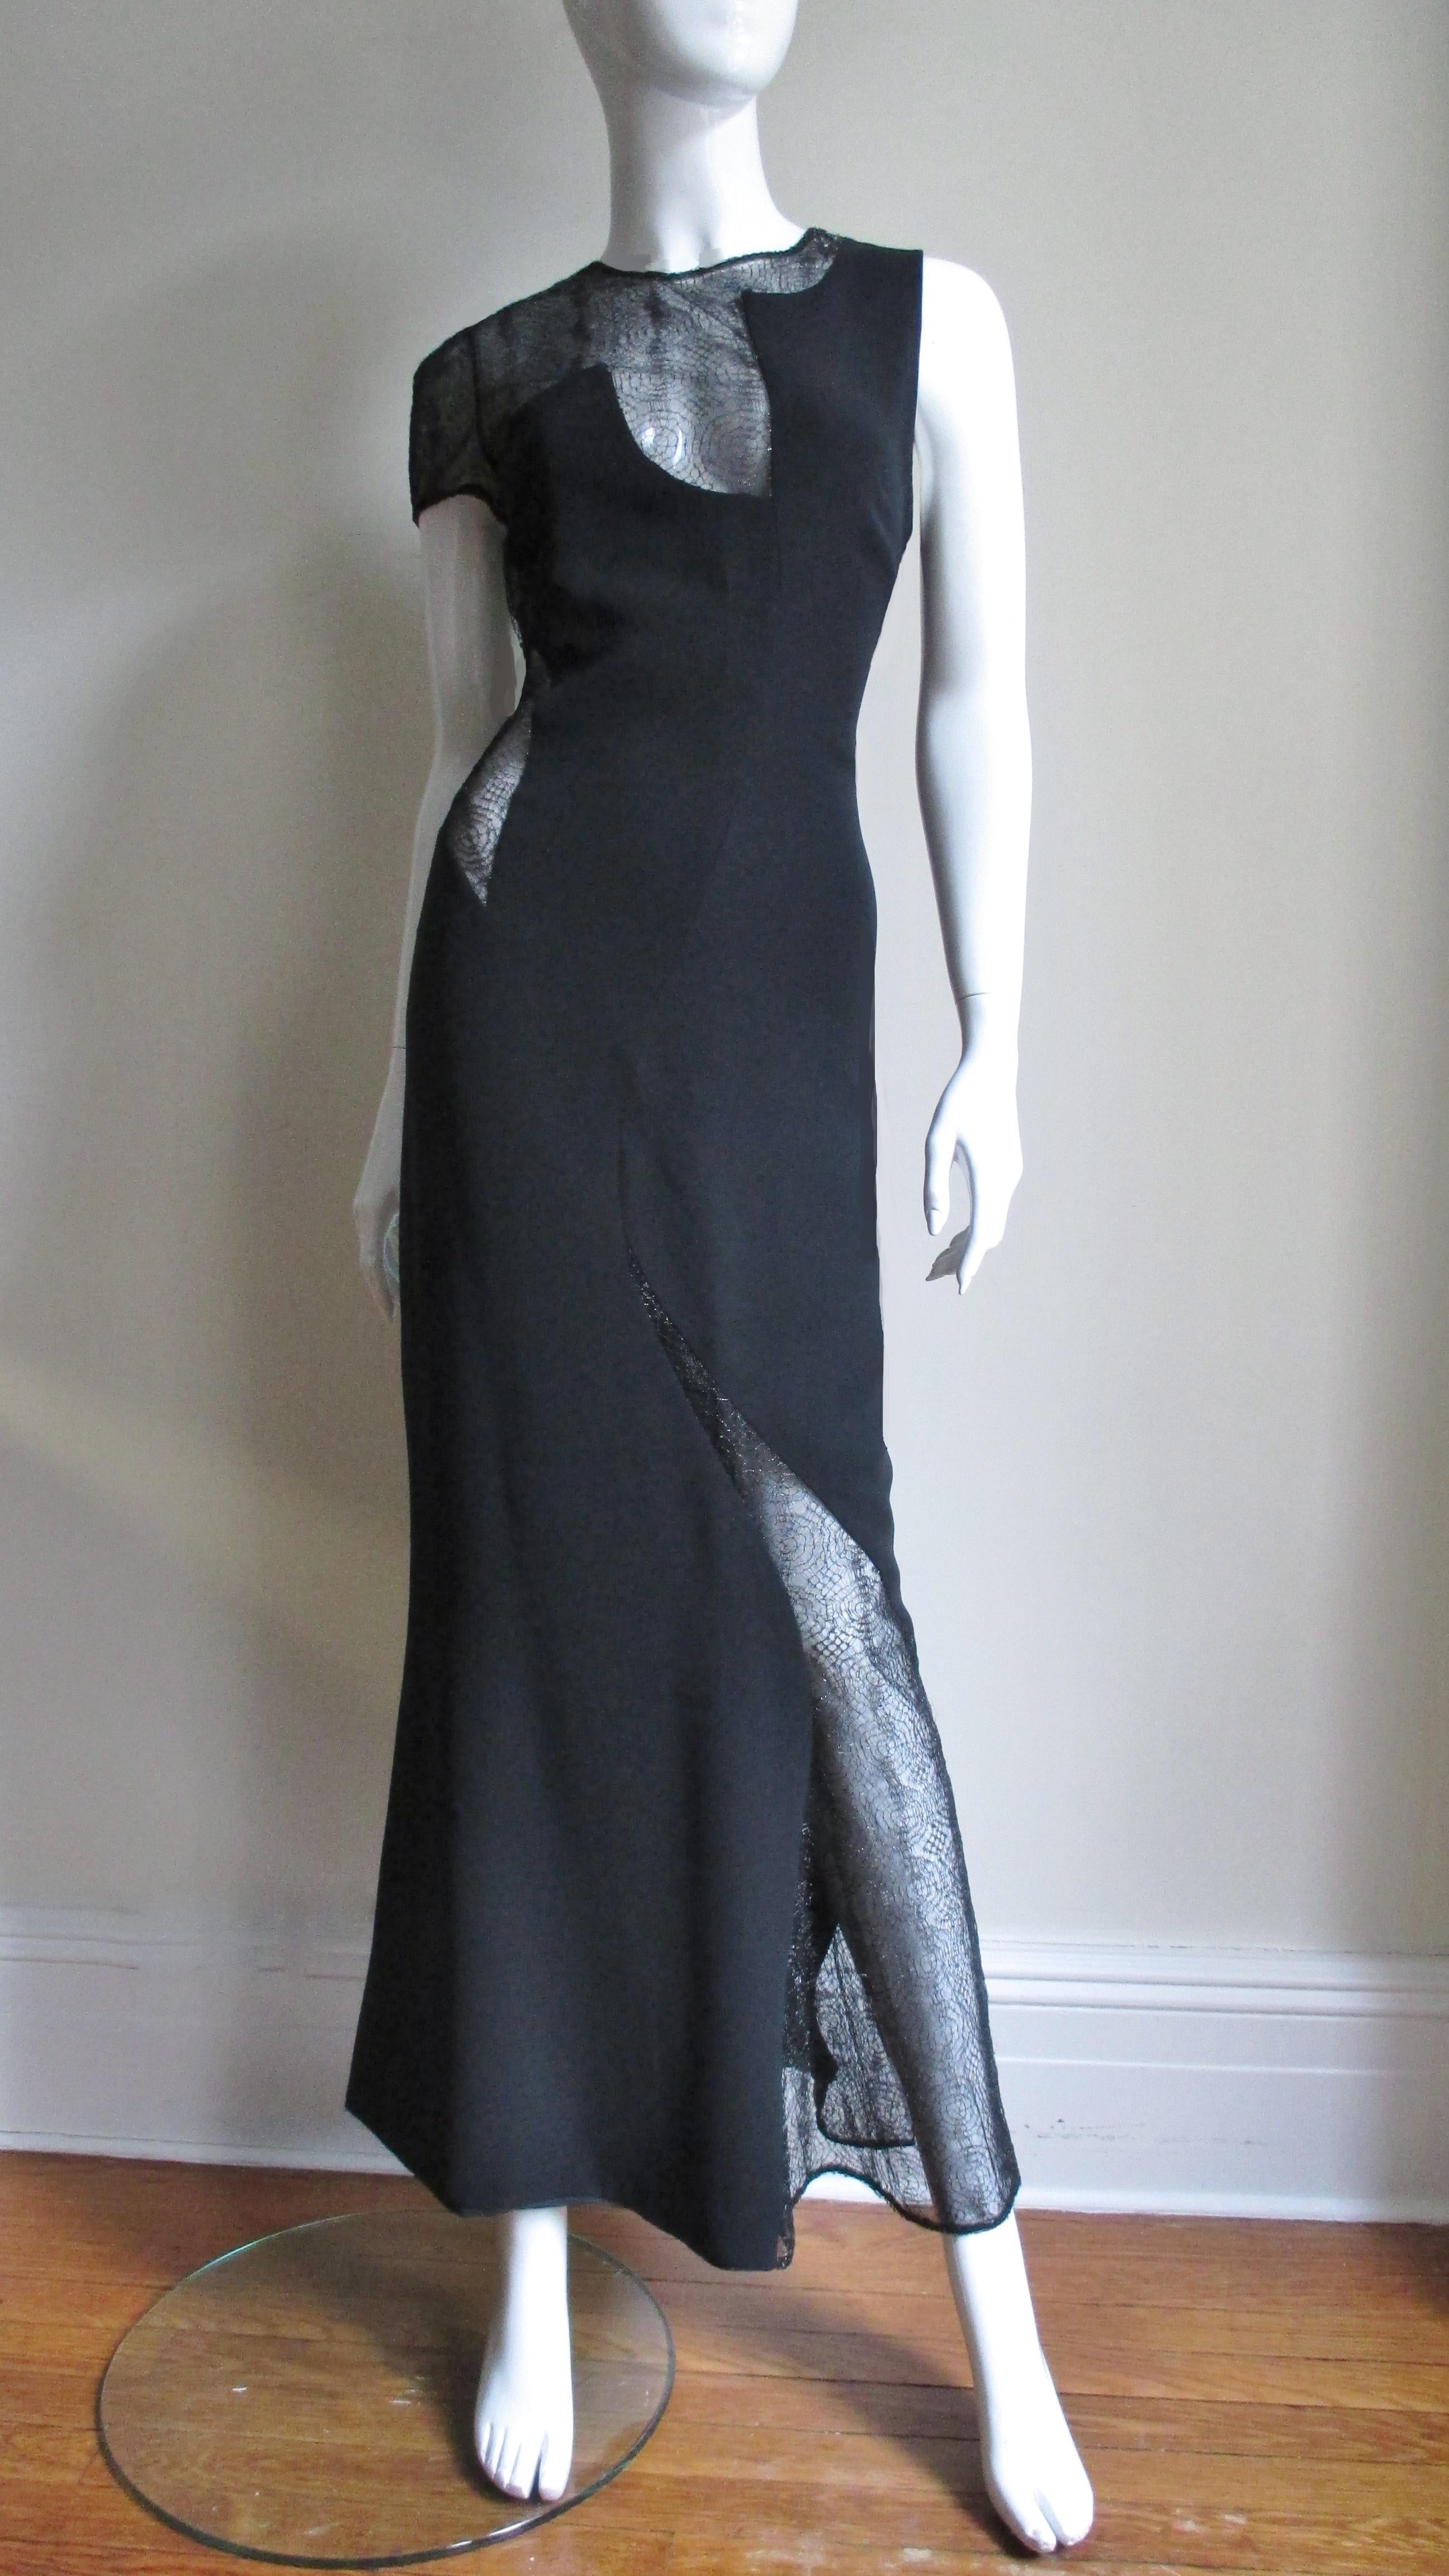 An amazing Gianni Versace Couture full length black silk dress.  it has a scoop back and one short sleeve.  It is asymmetrically cut with web pattern lace covered cut outs at side, leg, sleeve and decolletage. The dress skims the body through the